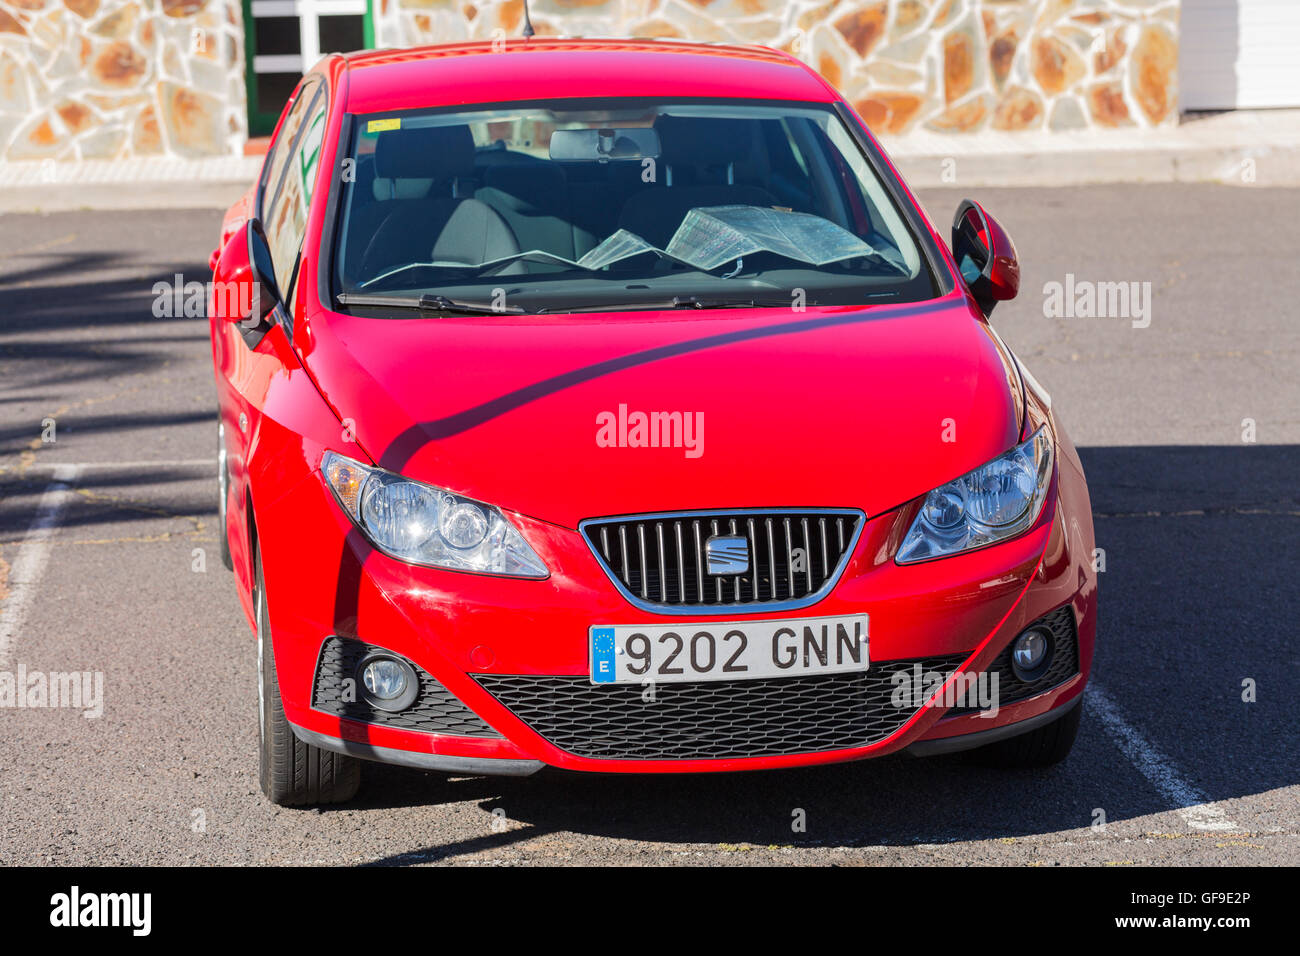 Shiny red Seat Ibiza car front view, parked. Stock Photo